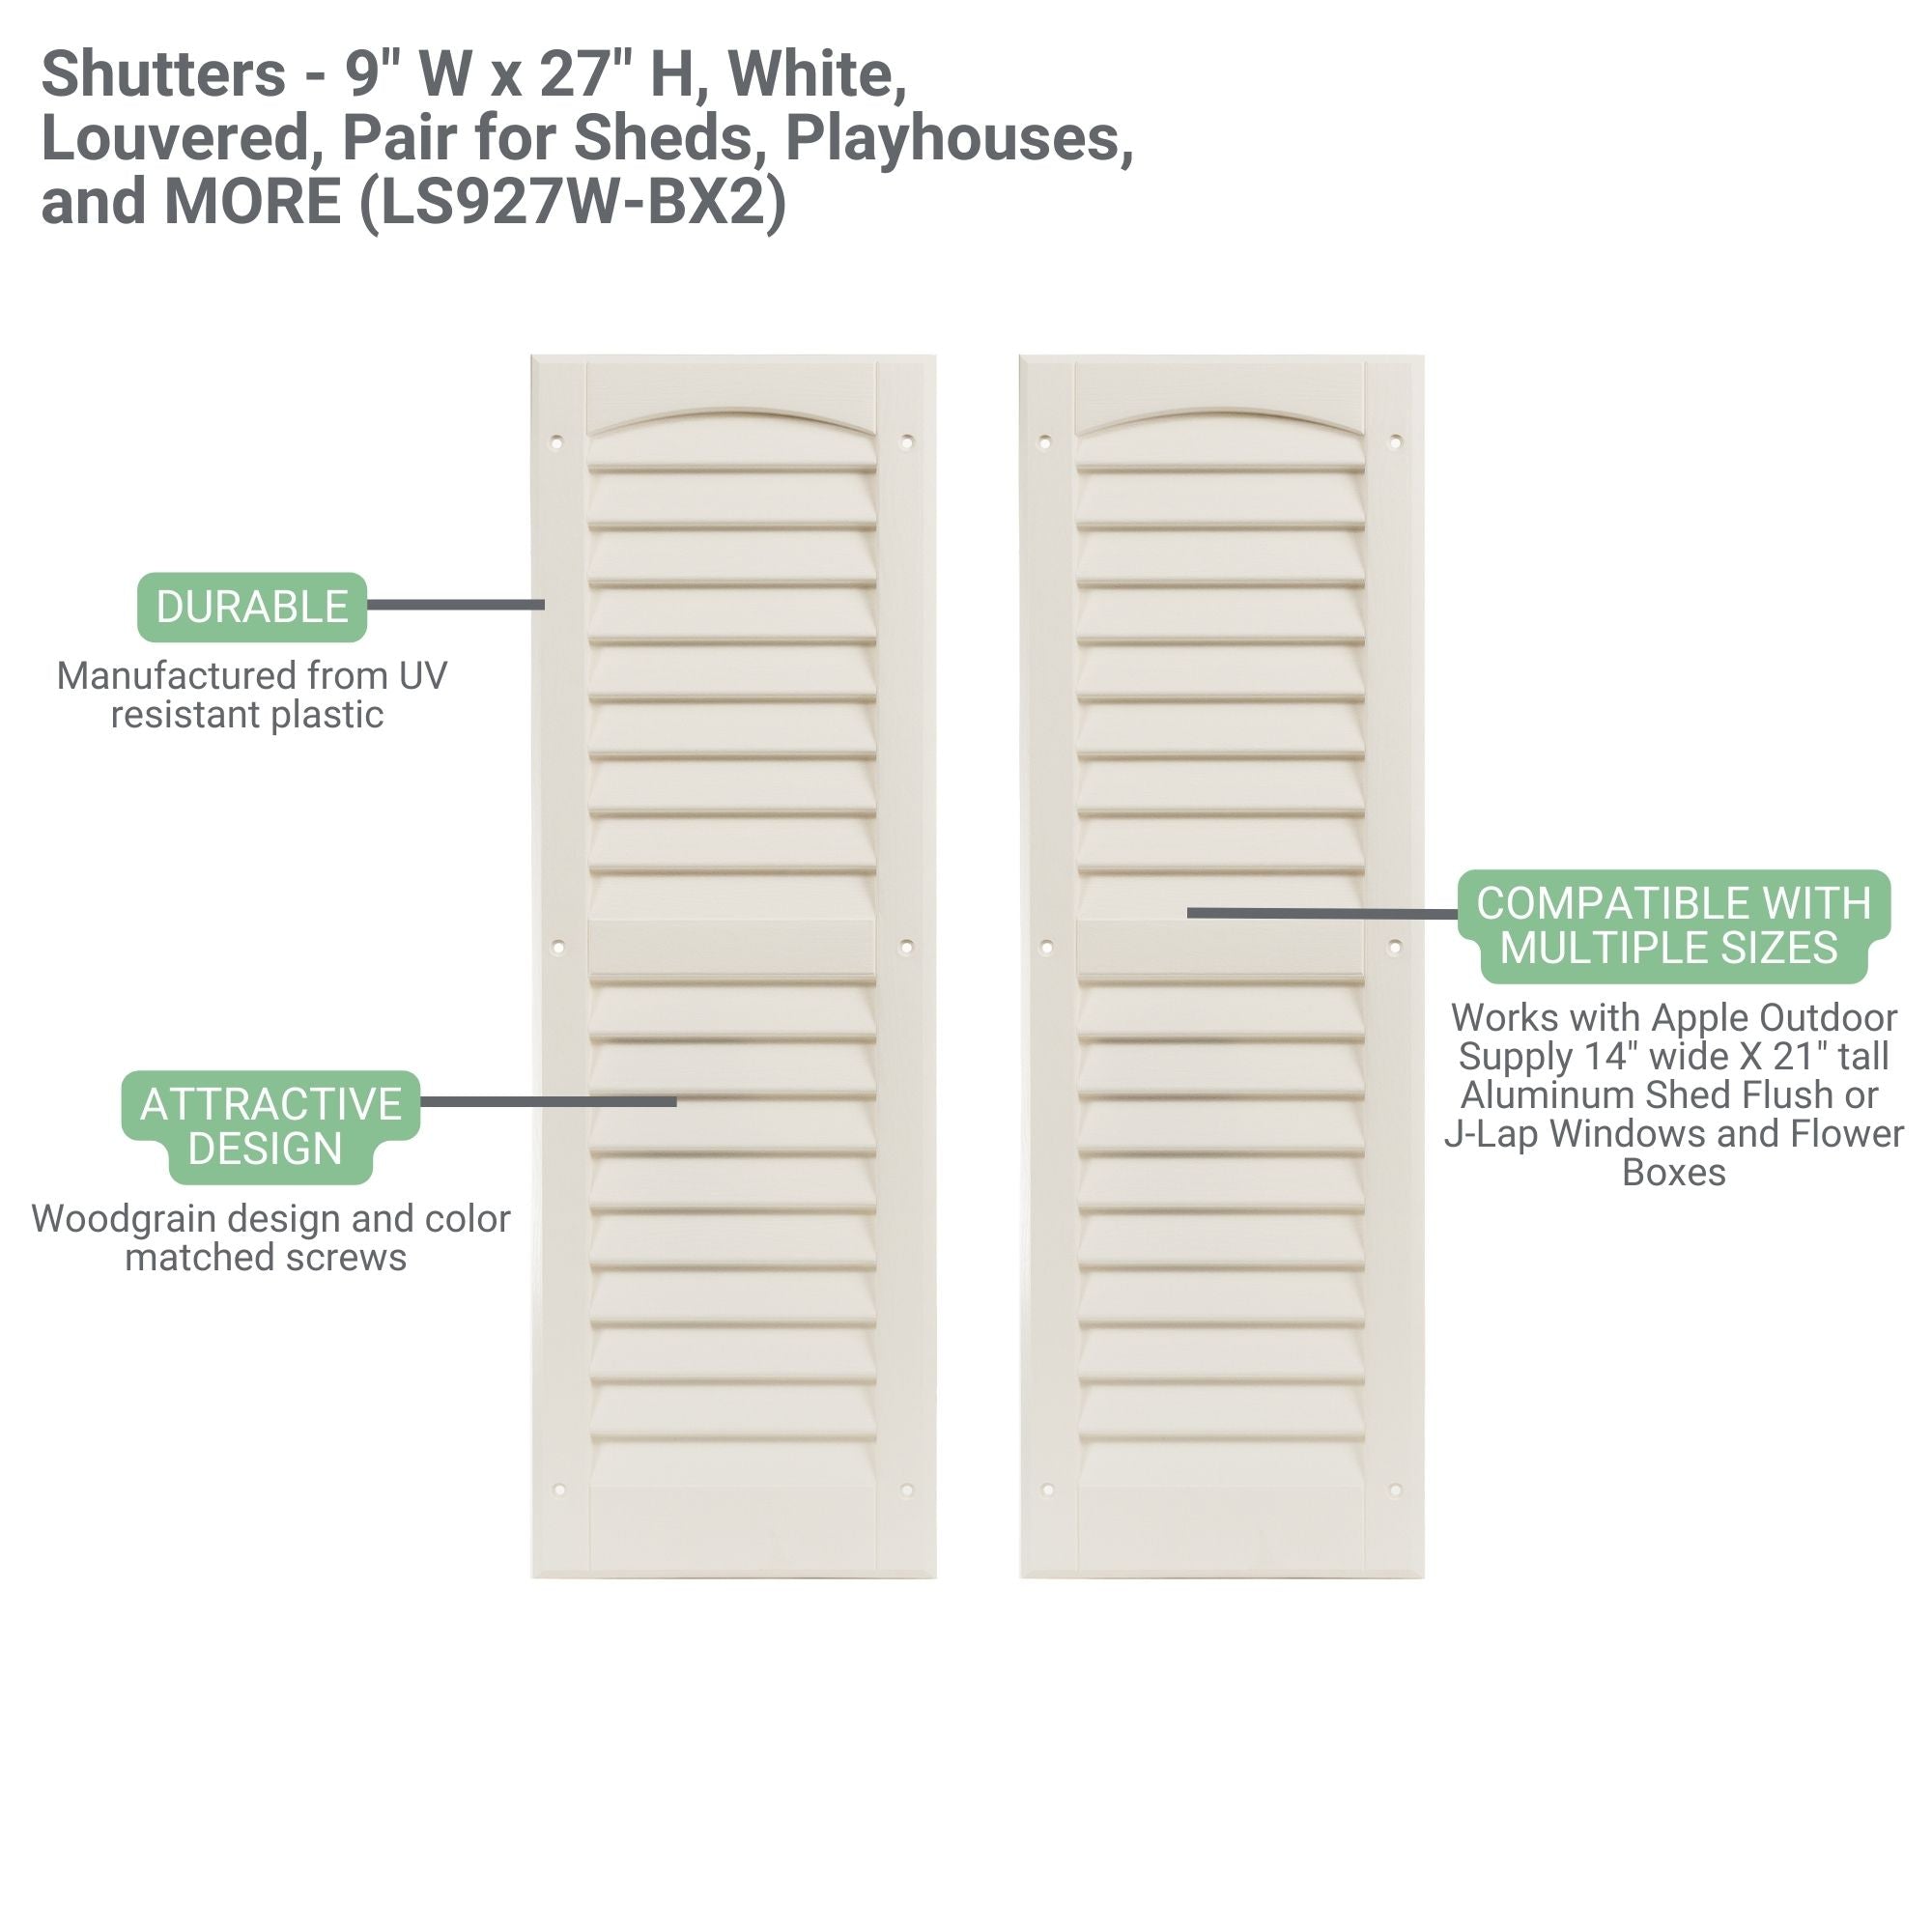 Shutters - 9" W x 27" H Louvered Shutters, 1 Pair